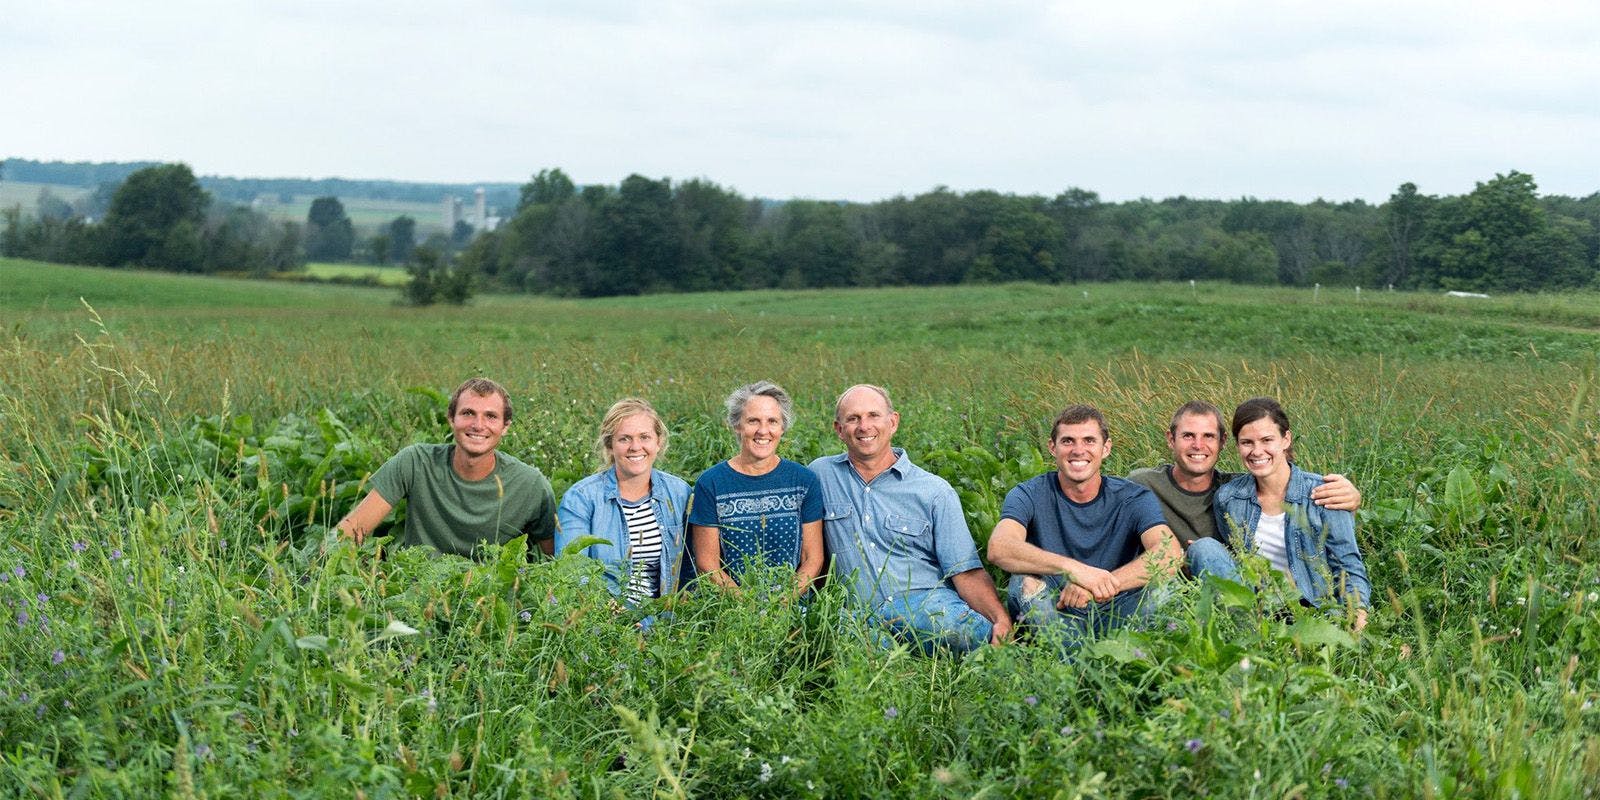 The Gasser family of Ohio poses for a photo in a meadow.